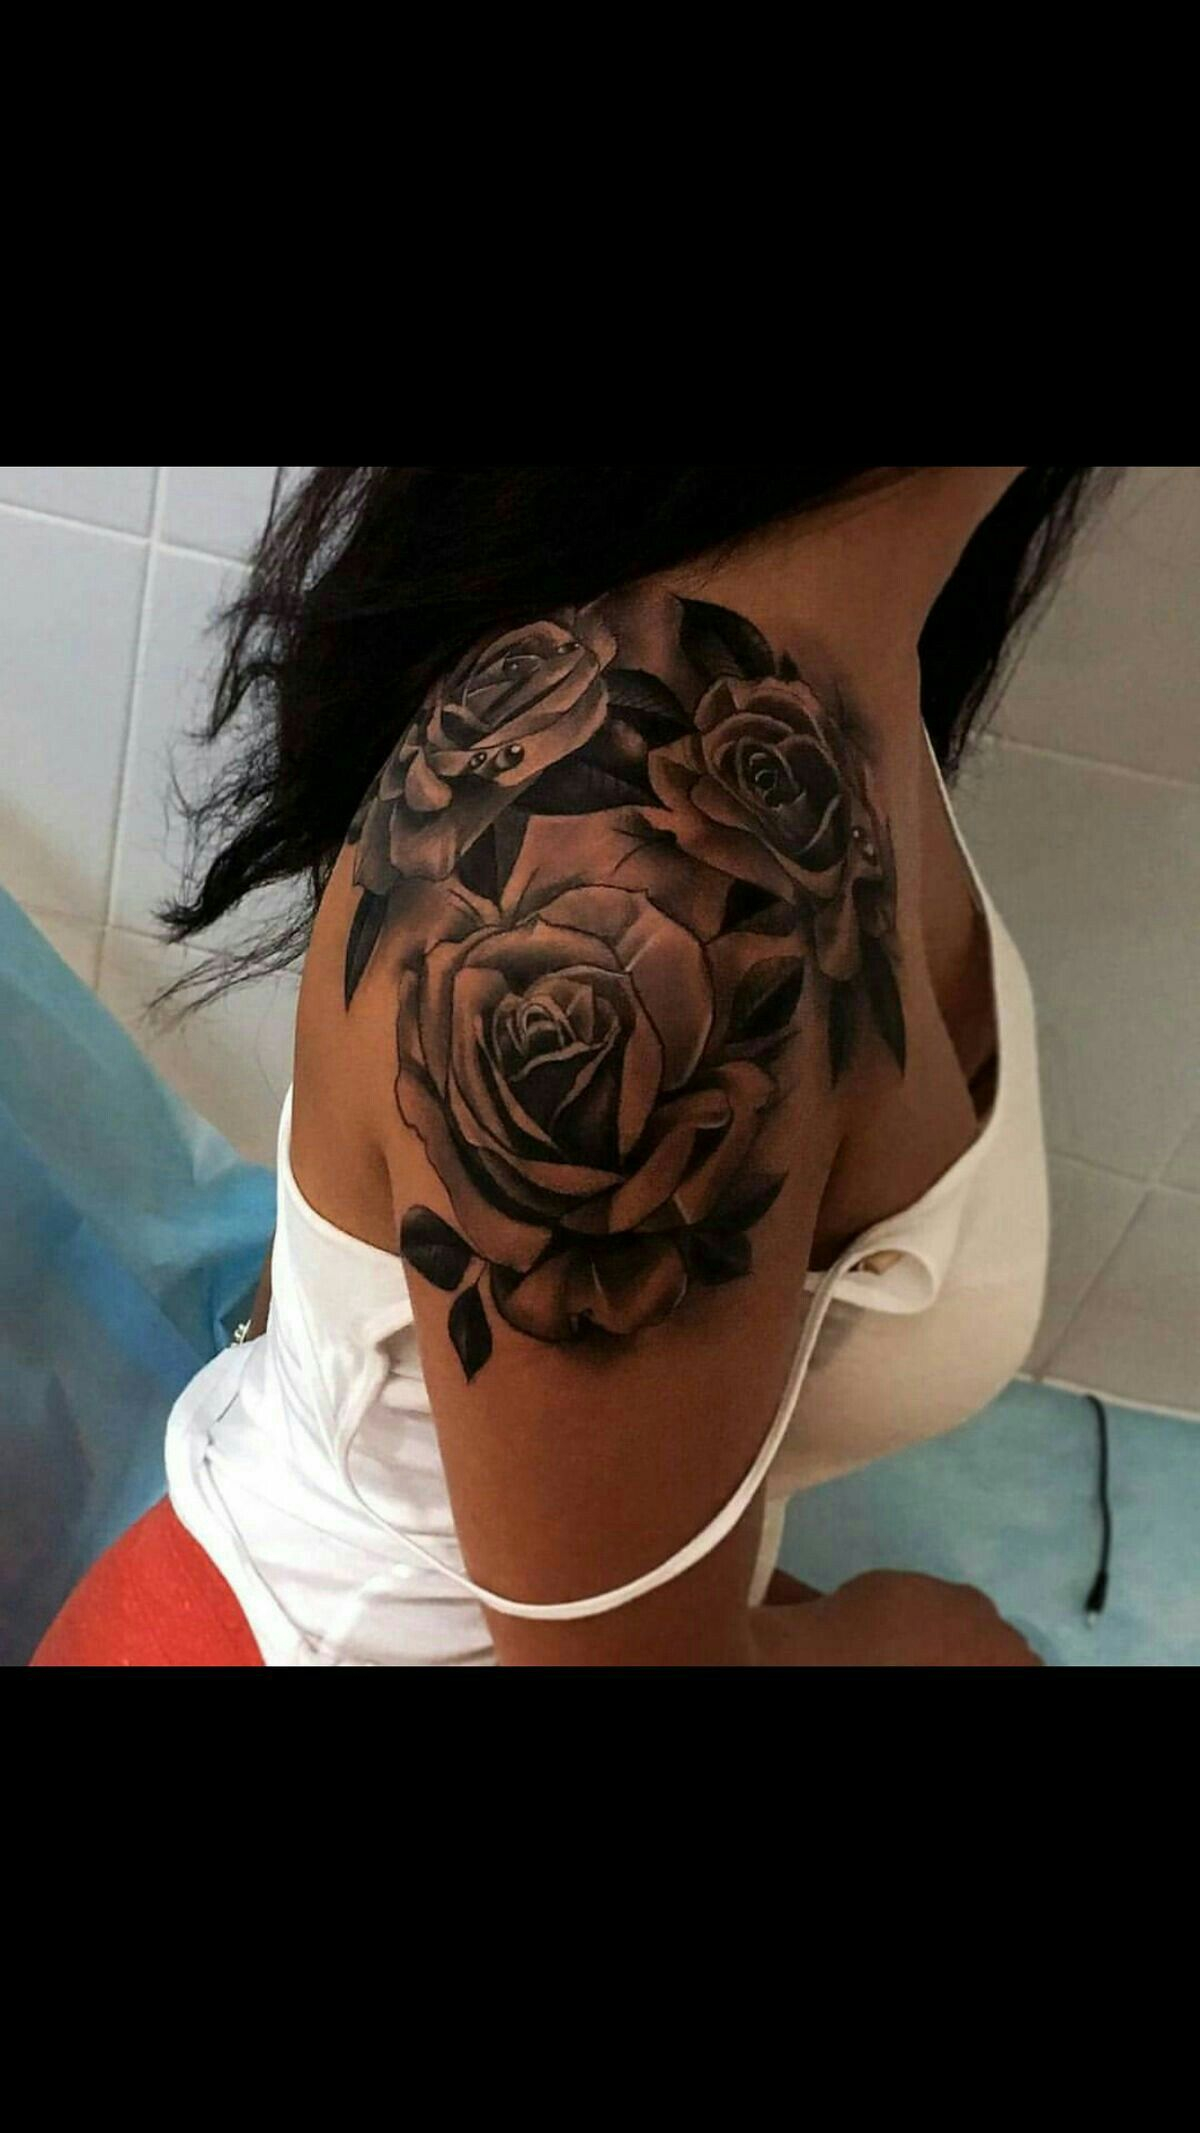 This Is Very Nice Work Its So Beautiful Tatoo Shoulder intended for sizing 1200 X 2133